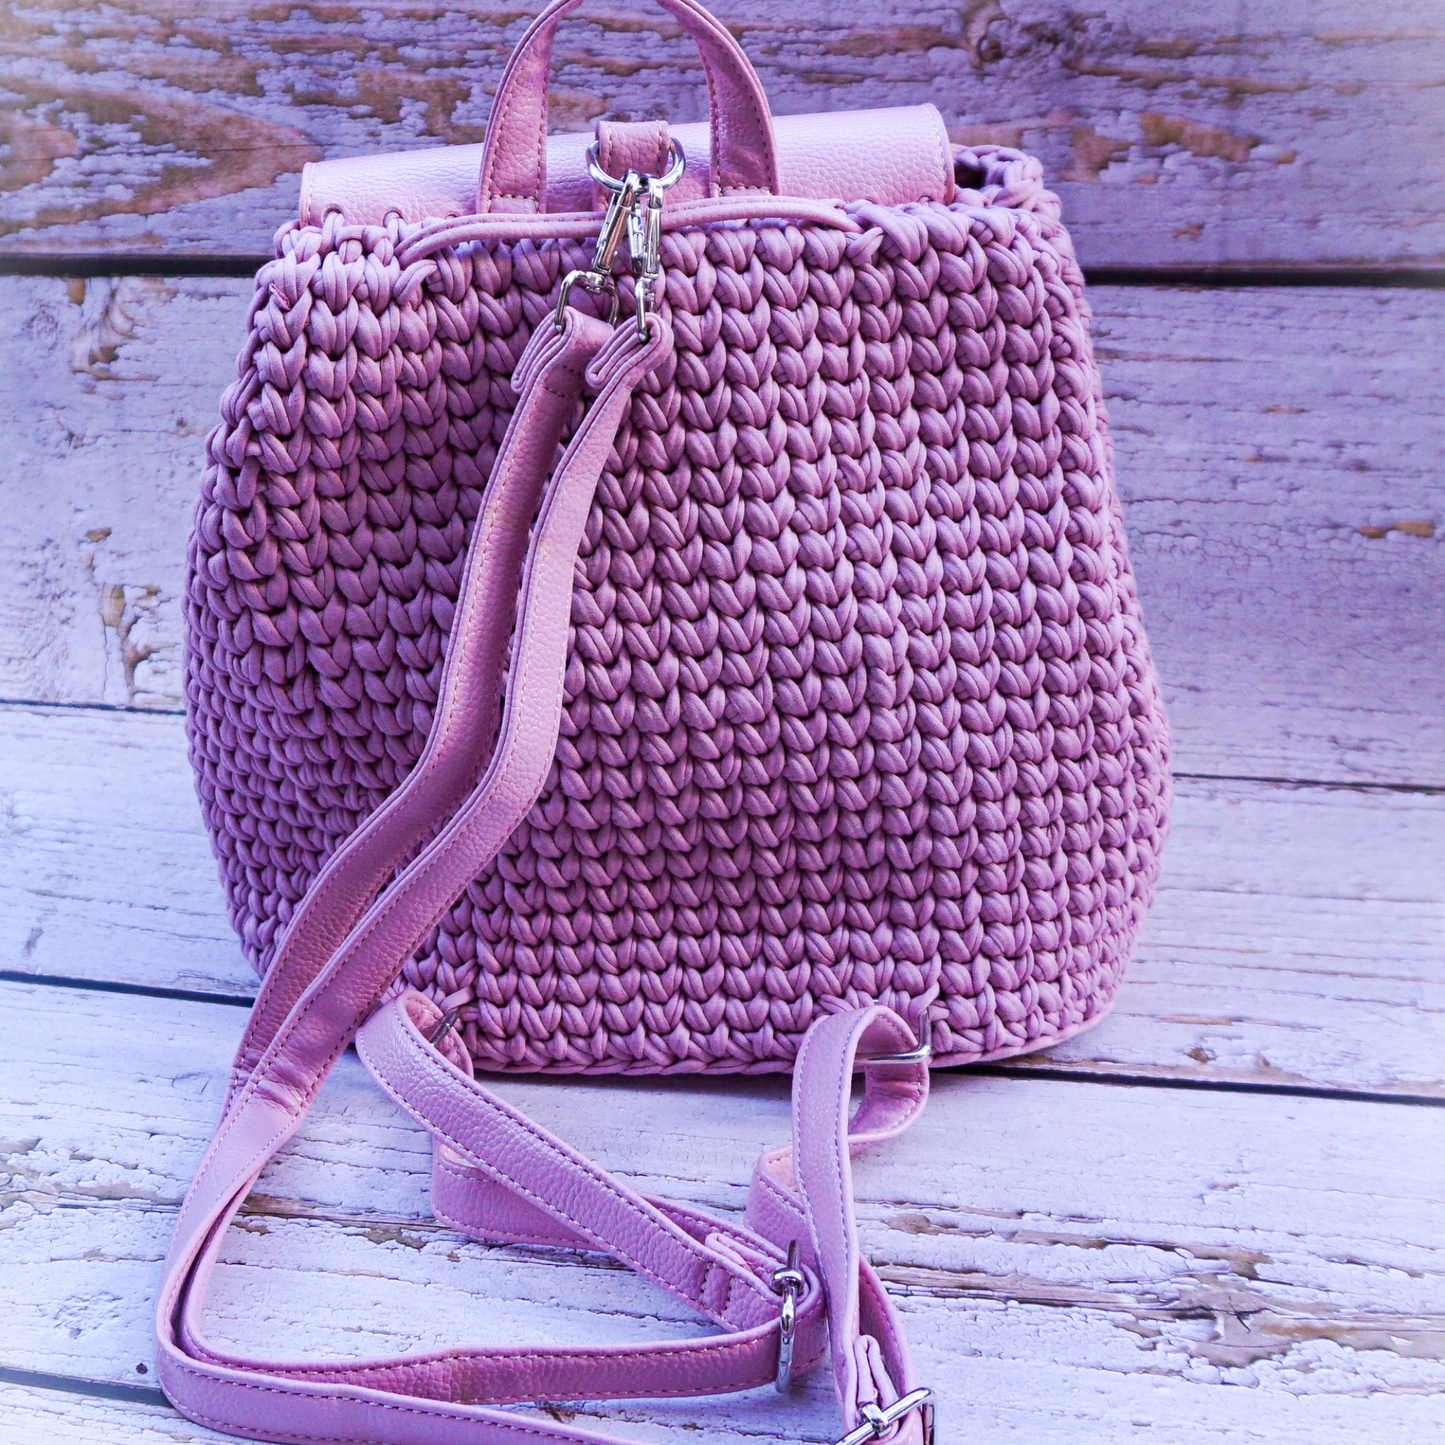 Crochet Backpack Kit with Leather Bag Base Accessories, Purse Hardware, Tshirt yarn and Crochet Pattern